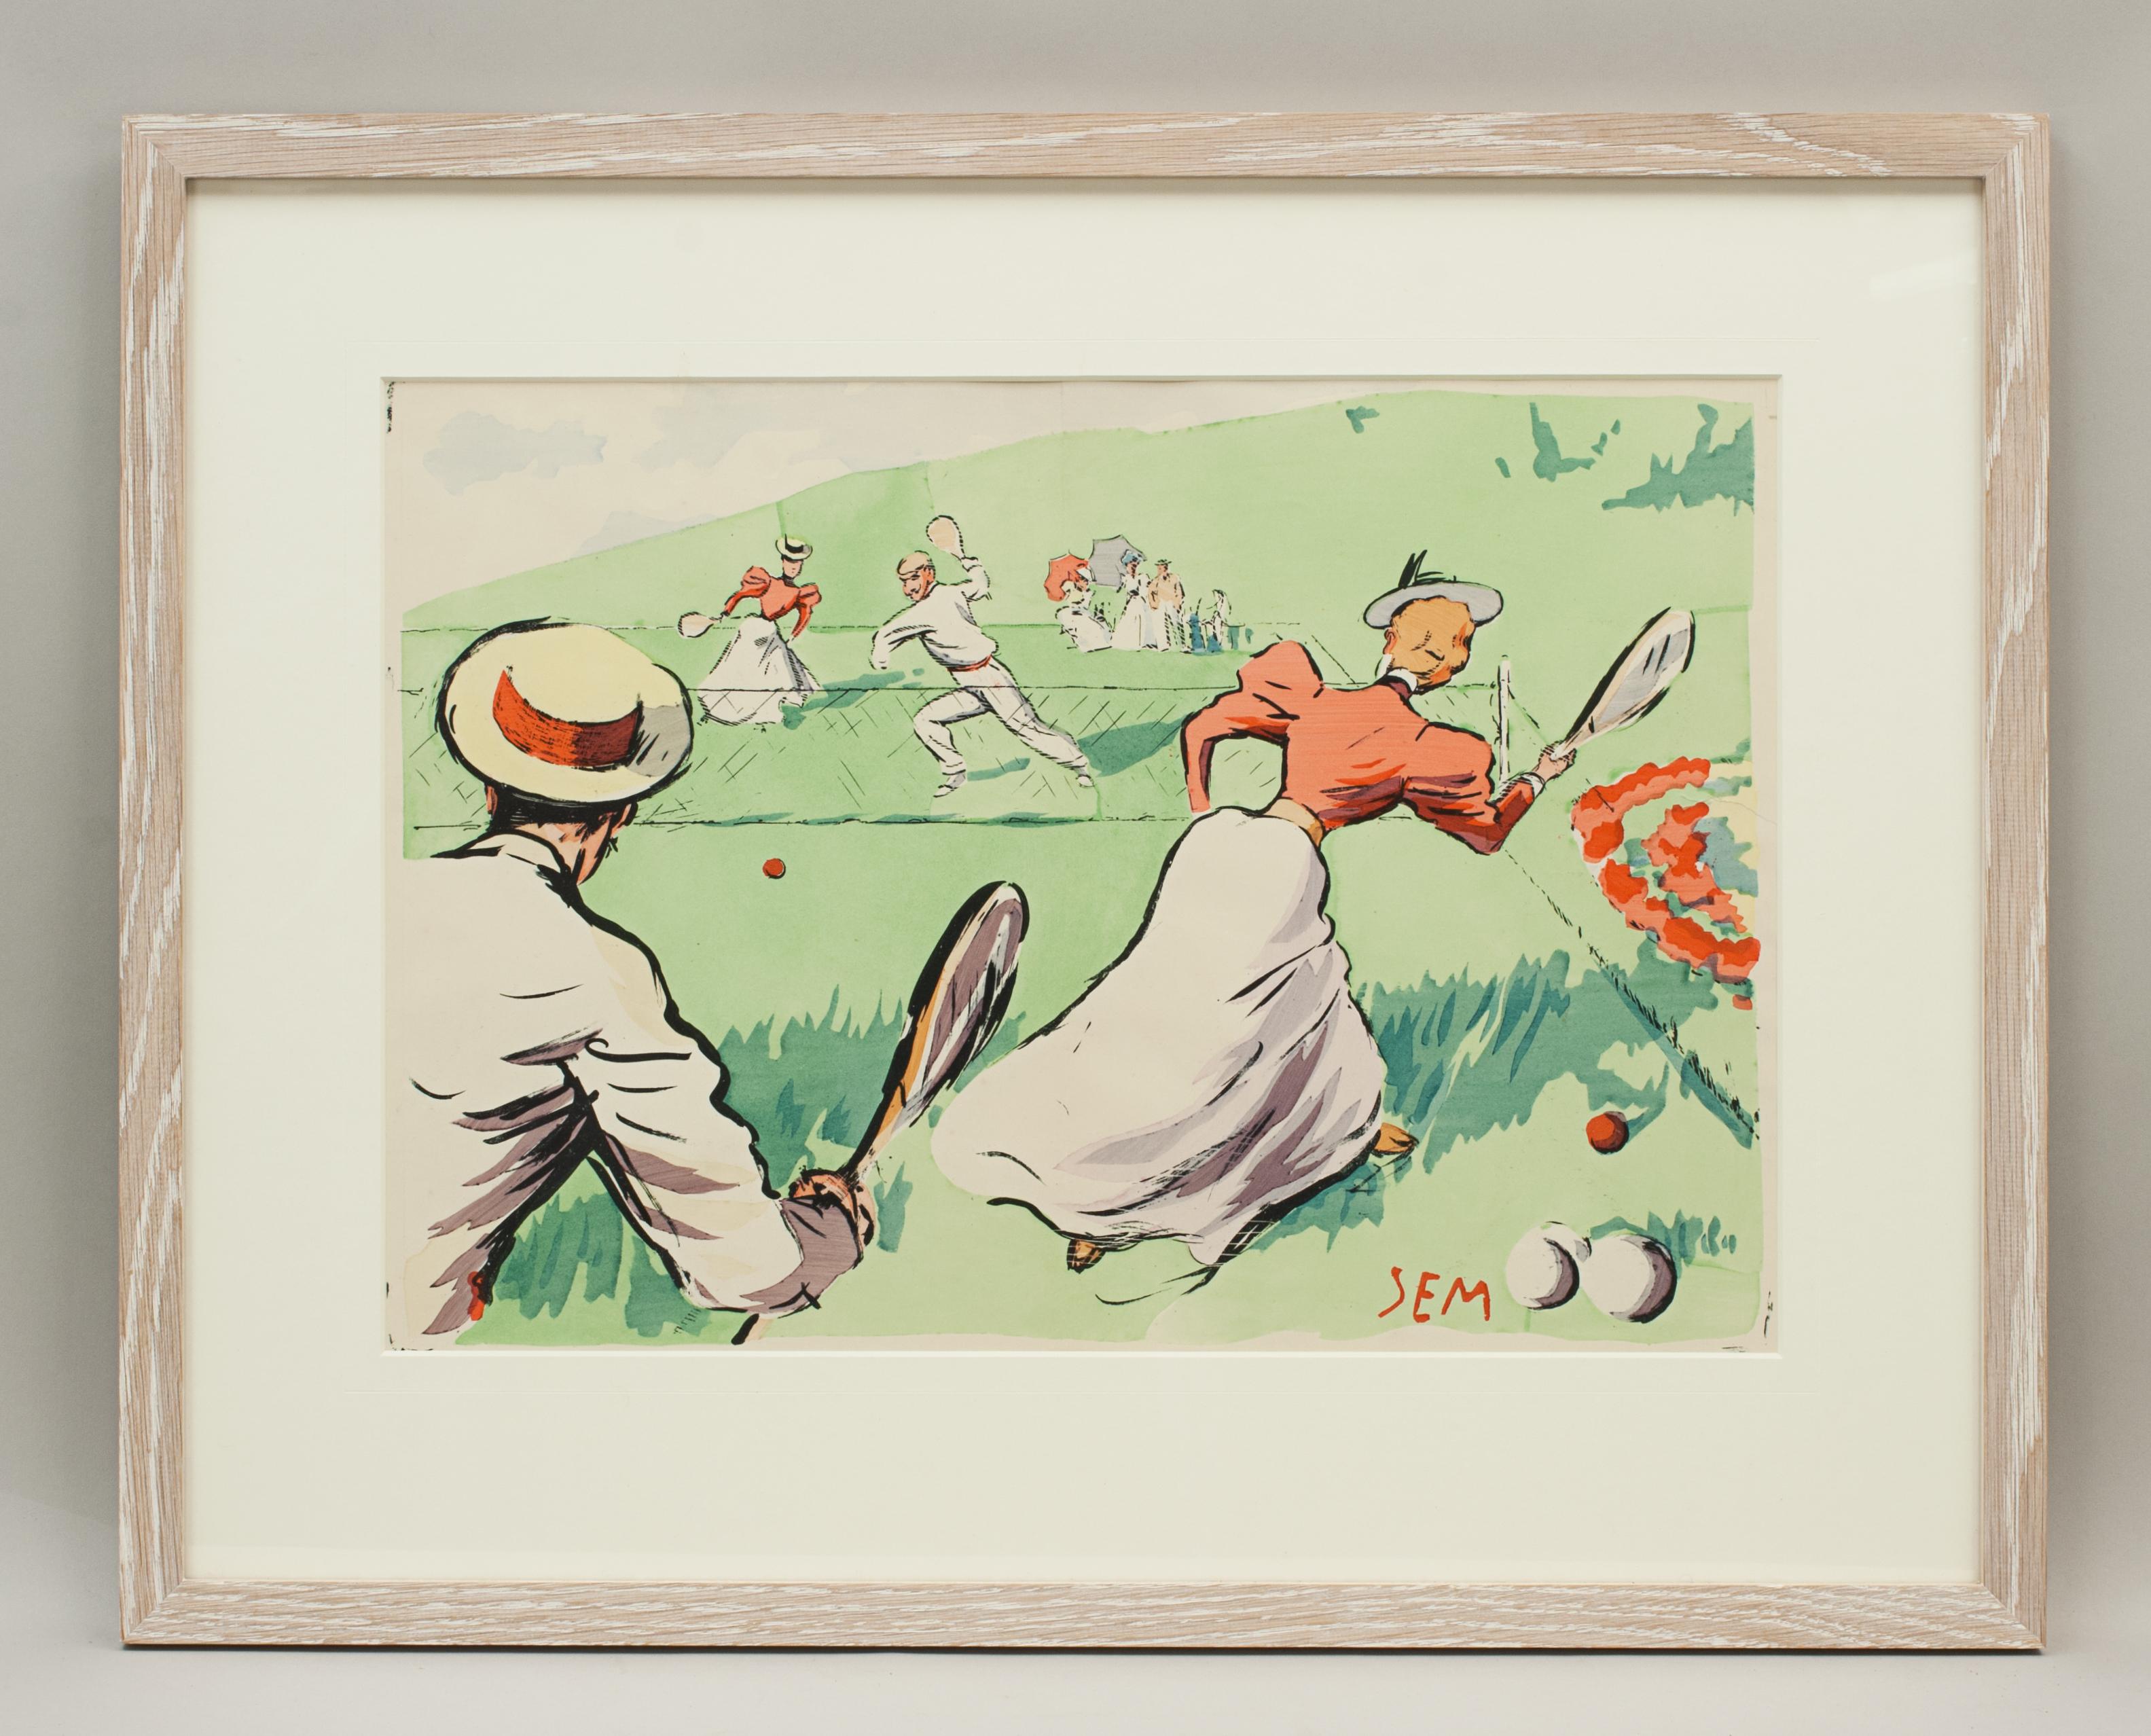 Caricaturist Lawn Tennis Print By SEM (Georges Goursat).
An extremely rare tennis chromolithograph by the outstanding French caricaturist artist Georges Goursat (1863-1934), known as Sem. The colourful tennis print depicts a mixed foursome match in